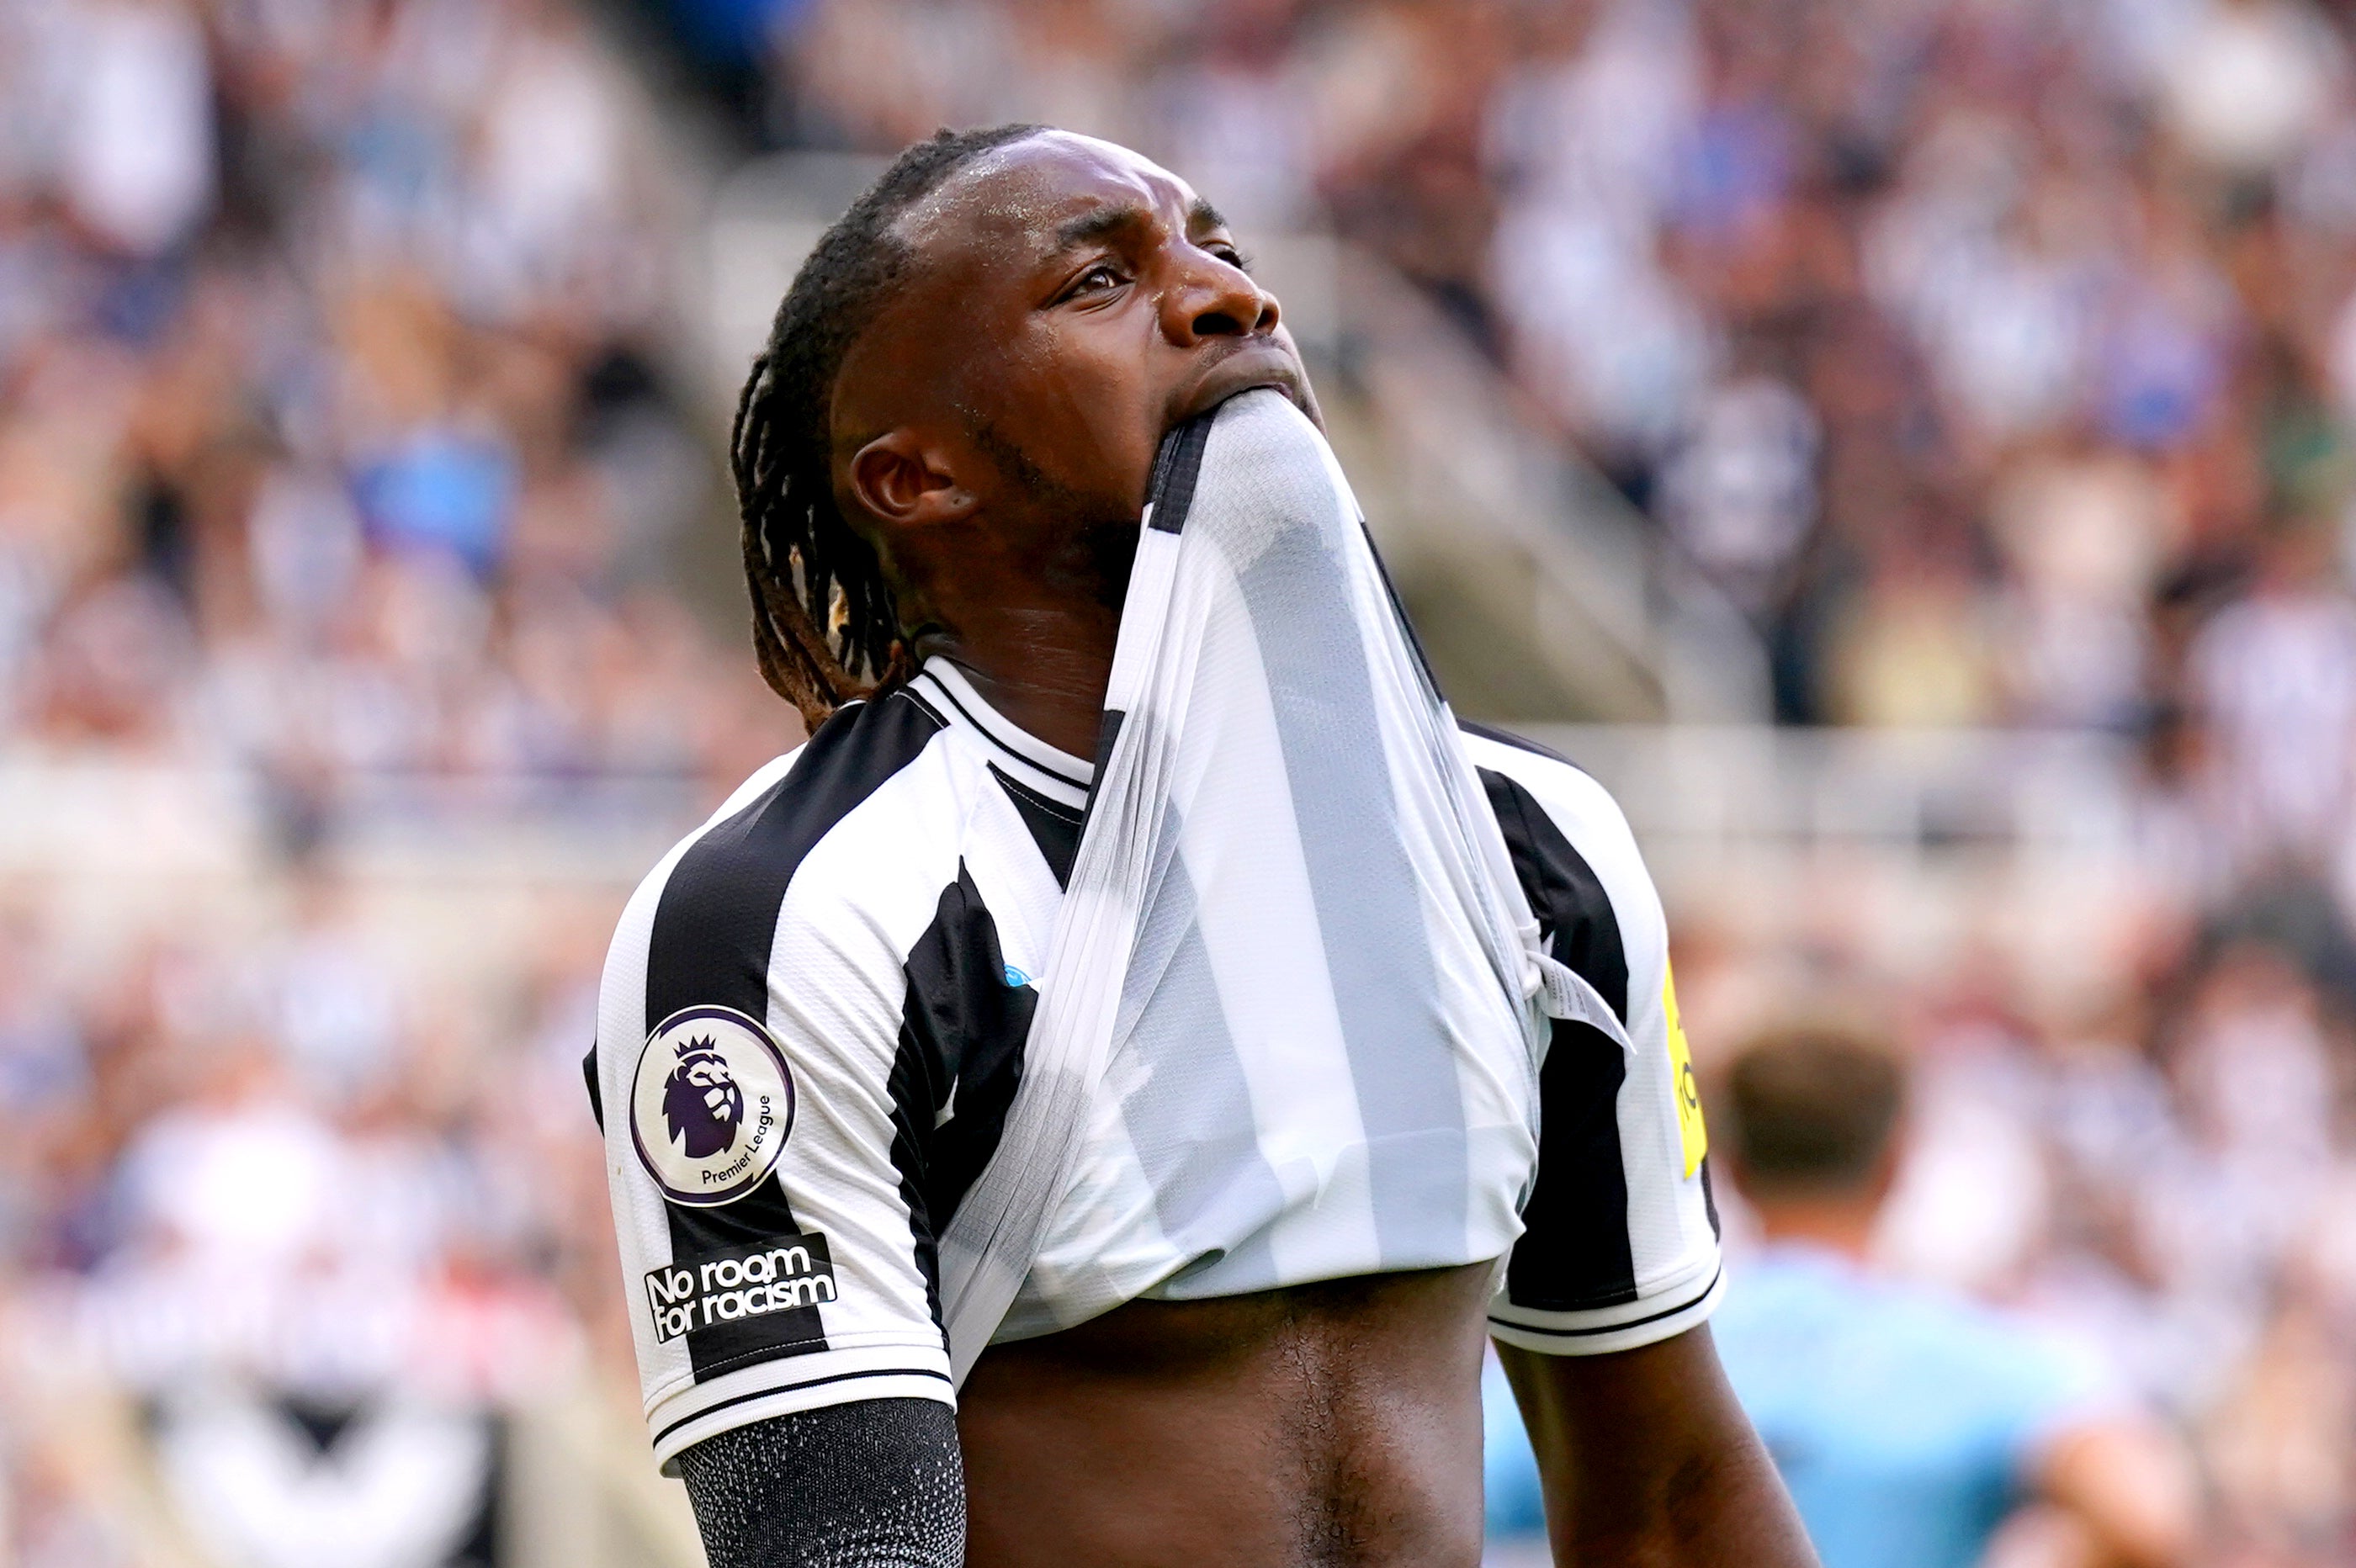 Allan Saint-Maximin remains an injury doubt for Newcastle ahead of Saturday’s game against Bournemouth (Owen Humphreys/PA)